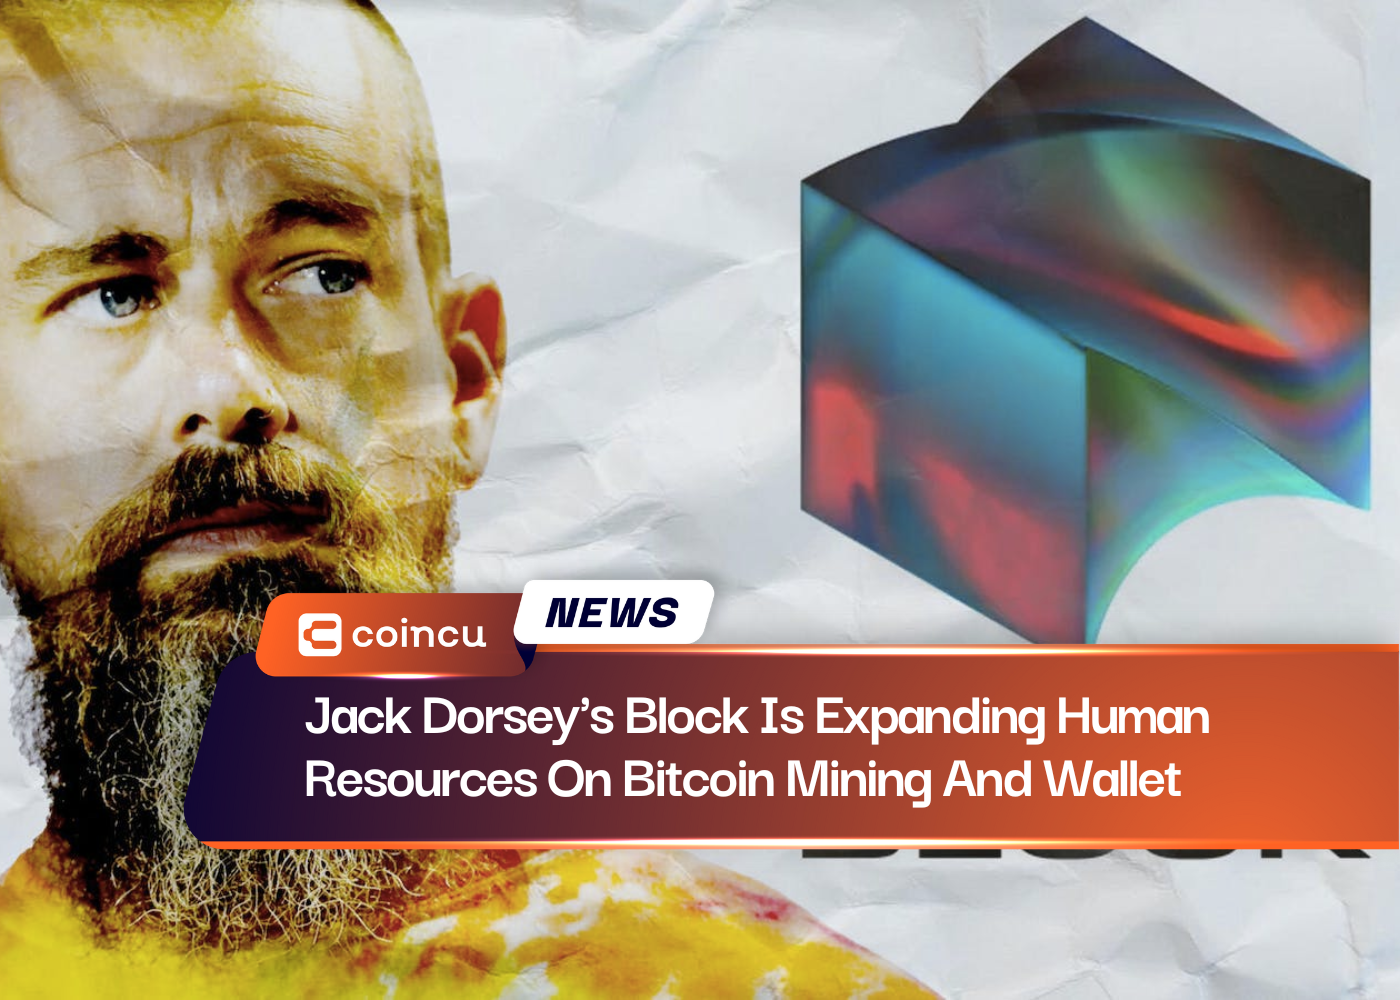 Jack Dorsey's Block Is Expanding Human Resources On Bitcoin Mining And Wallet